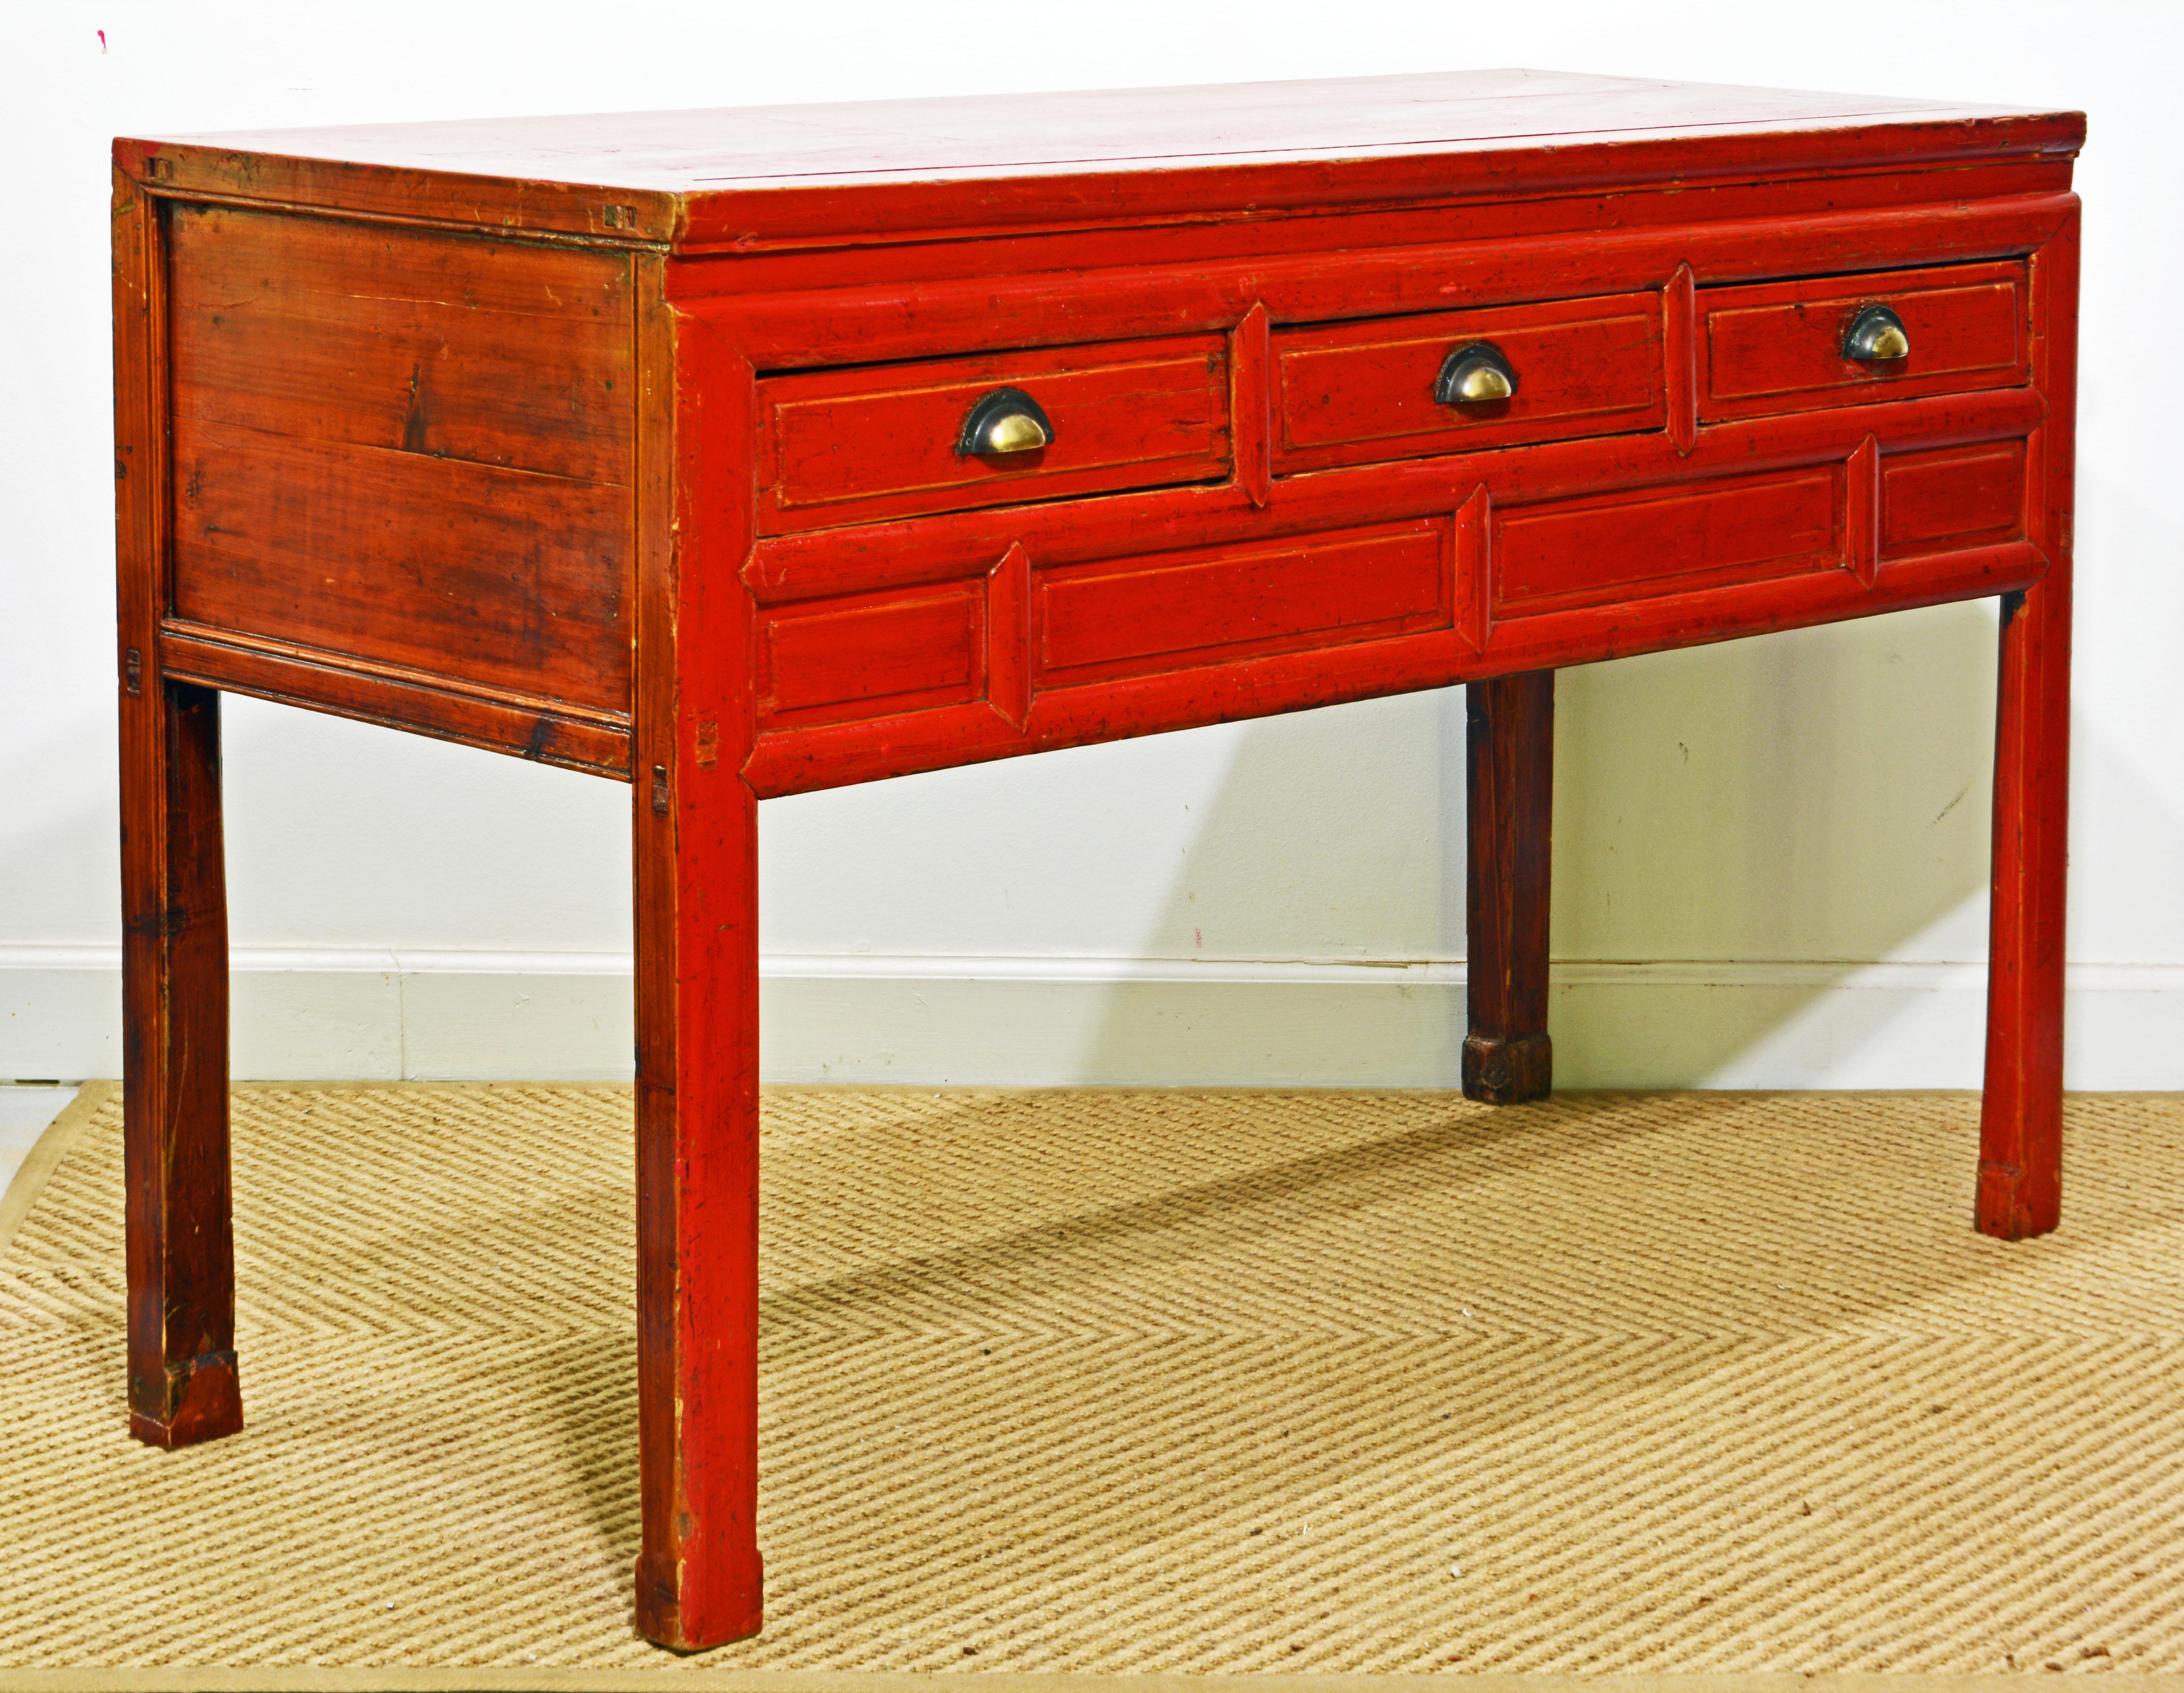 This is a rarely seen authentic 19th century Chinese console table with three drawers under which there is a storage compartment. The top and the front is red lacquered, the ends are natural wood lacquered. This piece of furniture is presented in